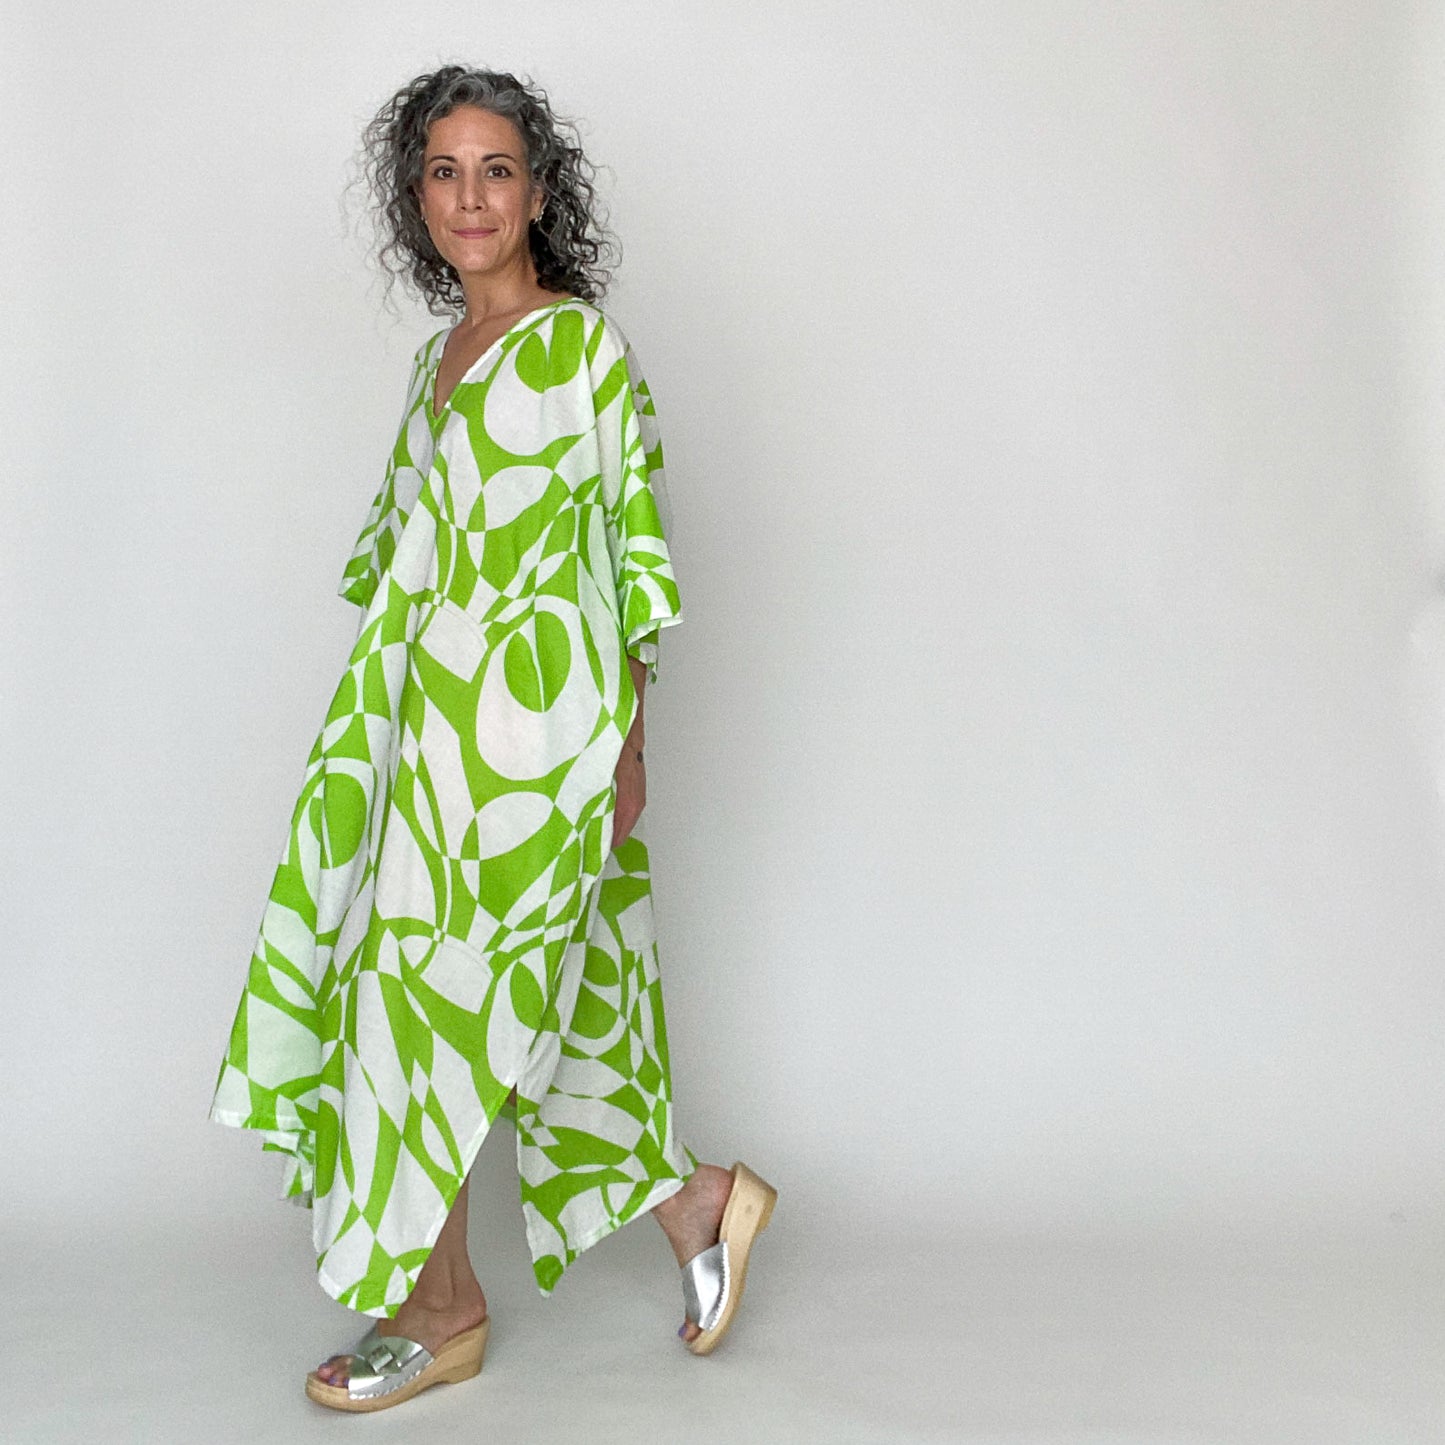 House of Lu Mae Caftan in Color Number 42 is a geometric print in a bright lime green and white. The fabric is a lightweight cotton lawn with a crisp drape. This caftan is absolutely perfect for the beach or for those hot summer days. Like a personal AC unit, Mae is guaranteed to keep you cool when the temps go up. 